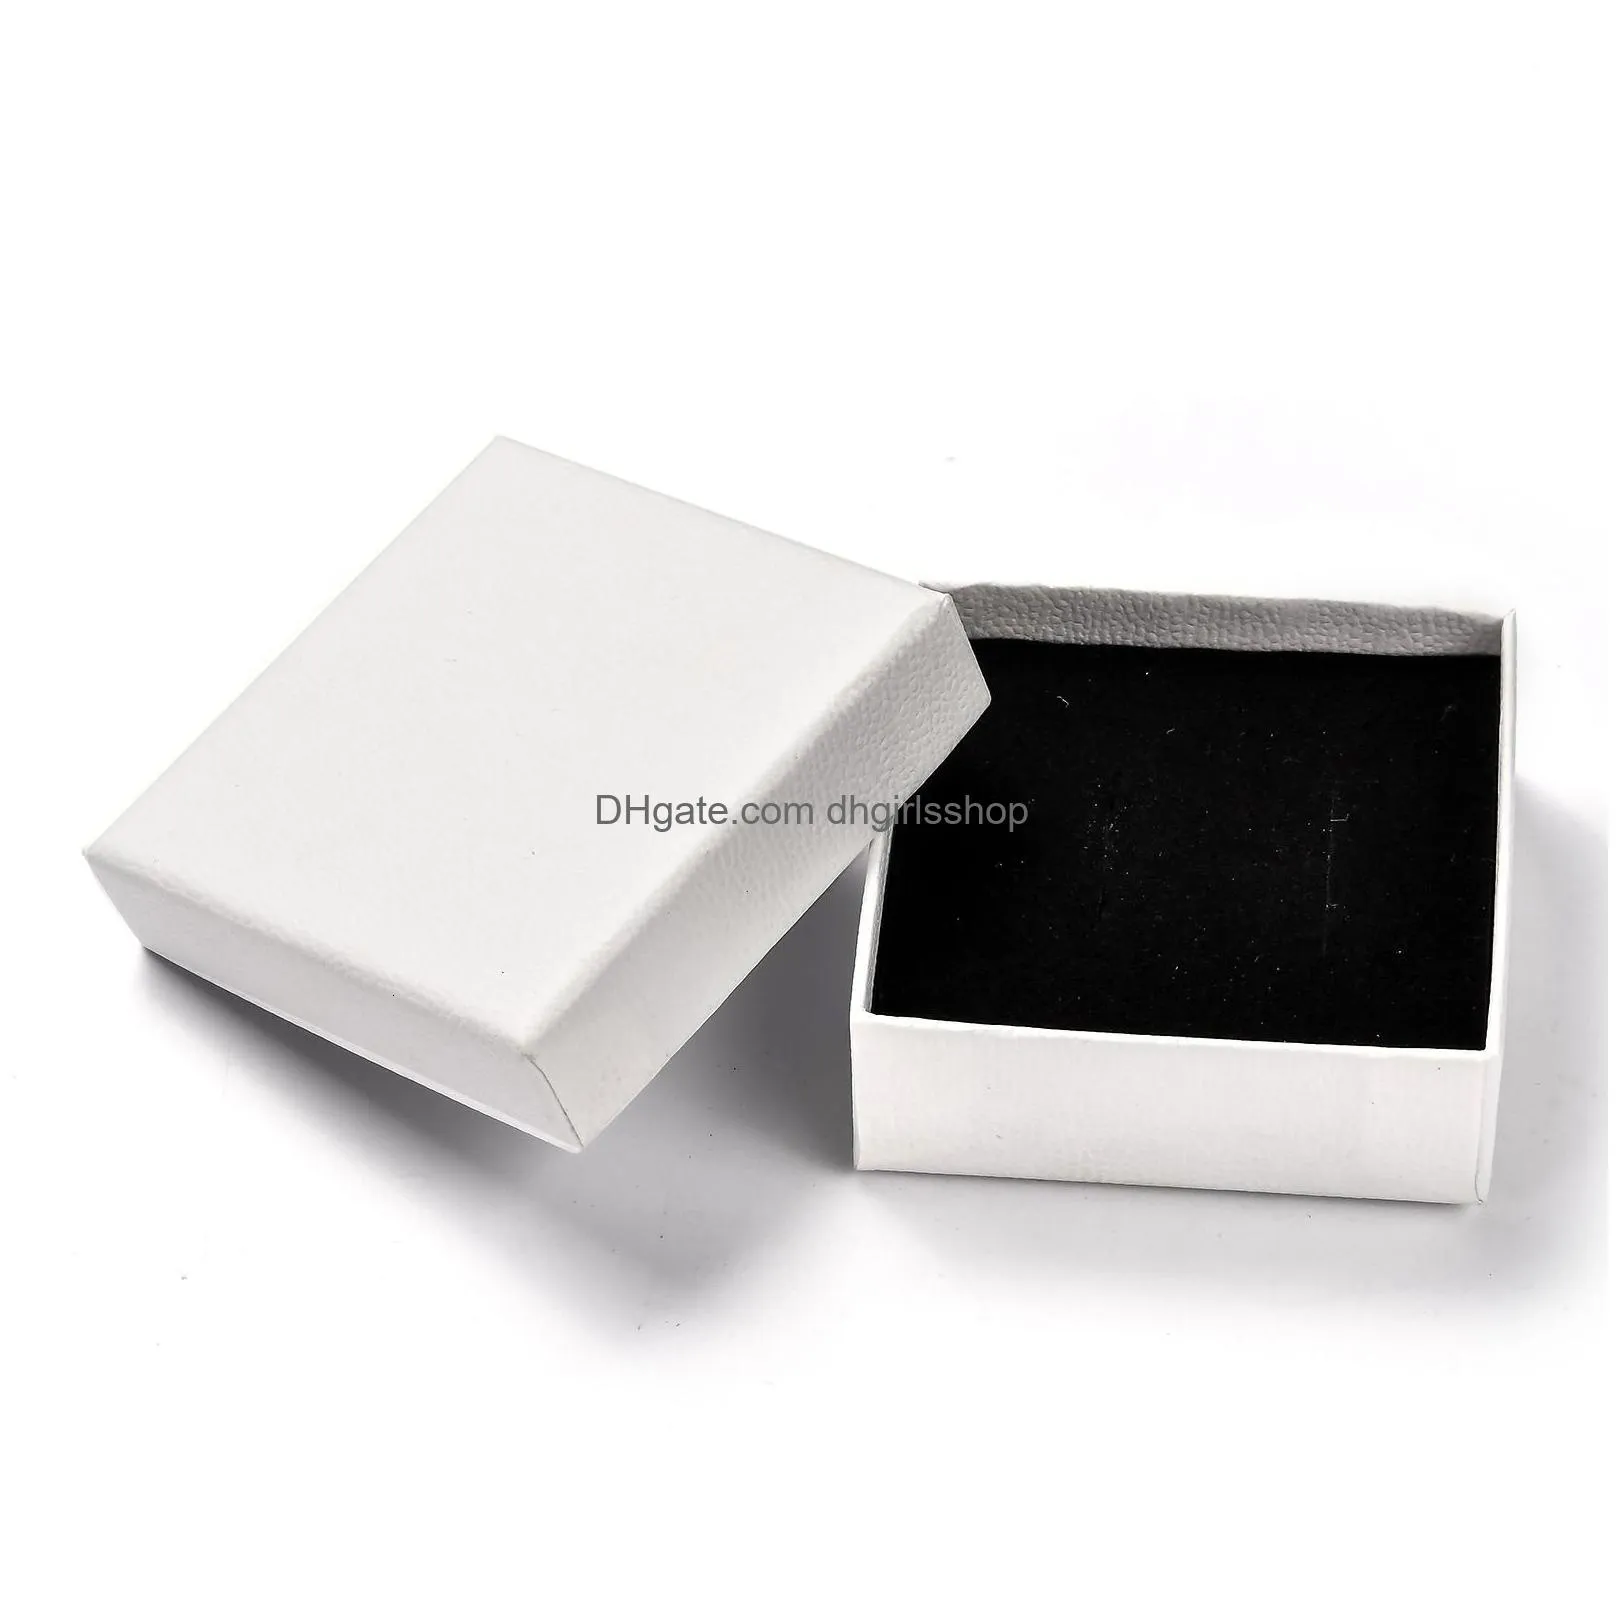 jewelry boxes 32pcs jewelry display box cardboard ring boxes with sponge for small watches necklaces earrings bracelet jewelry gift packaging